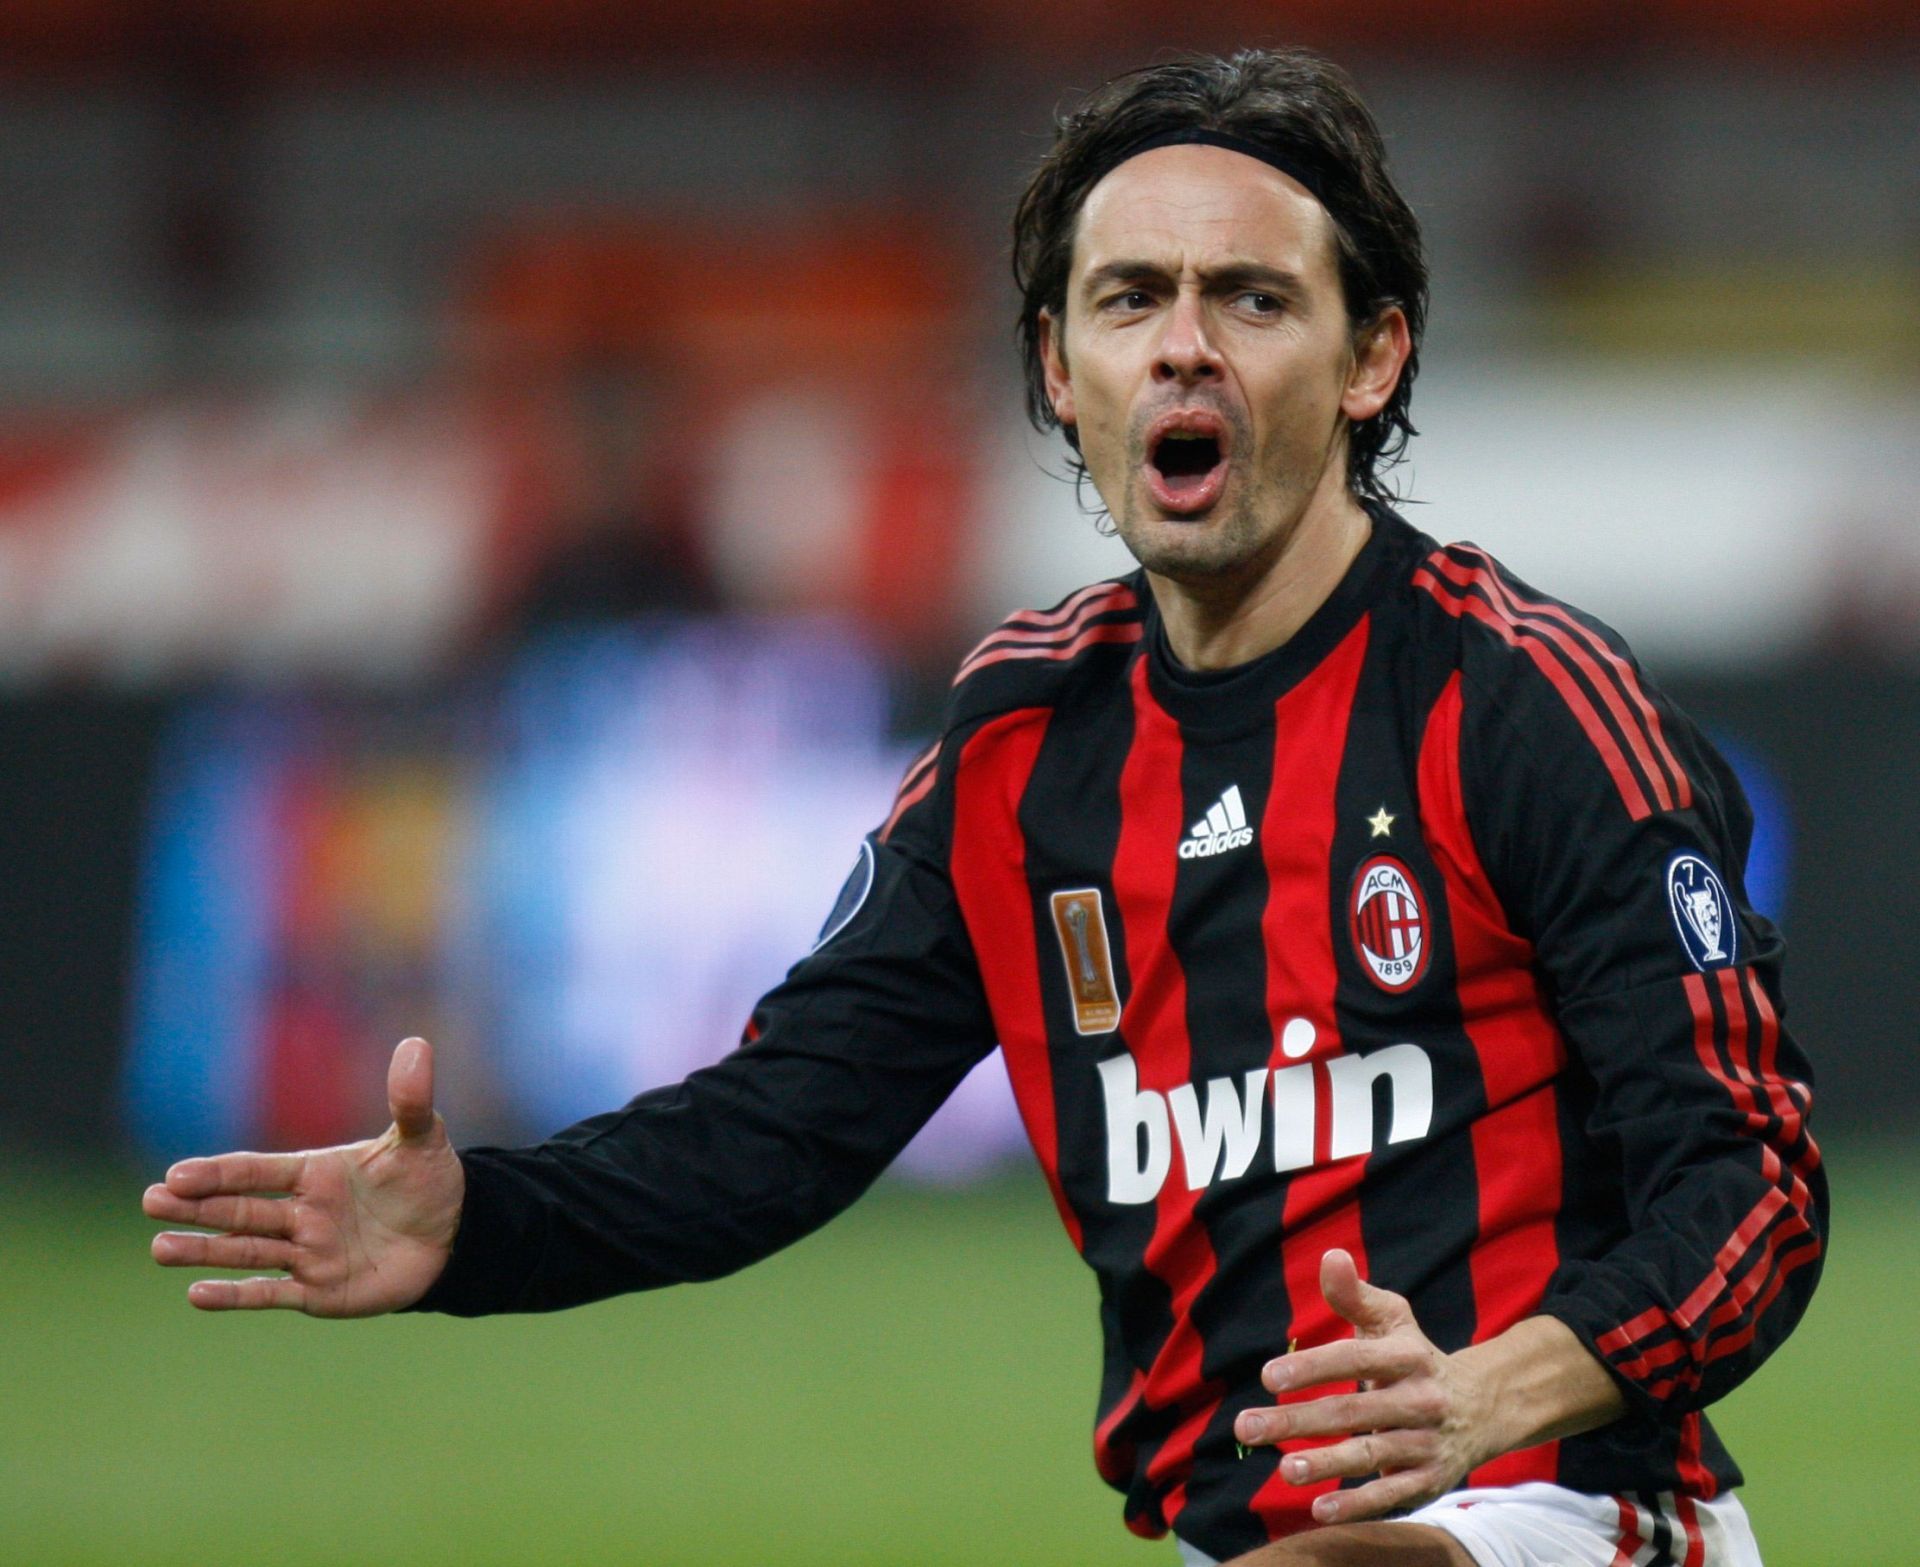 Filipo Inzaghi was sensational in front of the goal (Image via FourFourTwo)